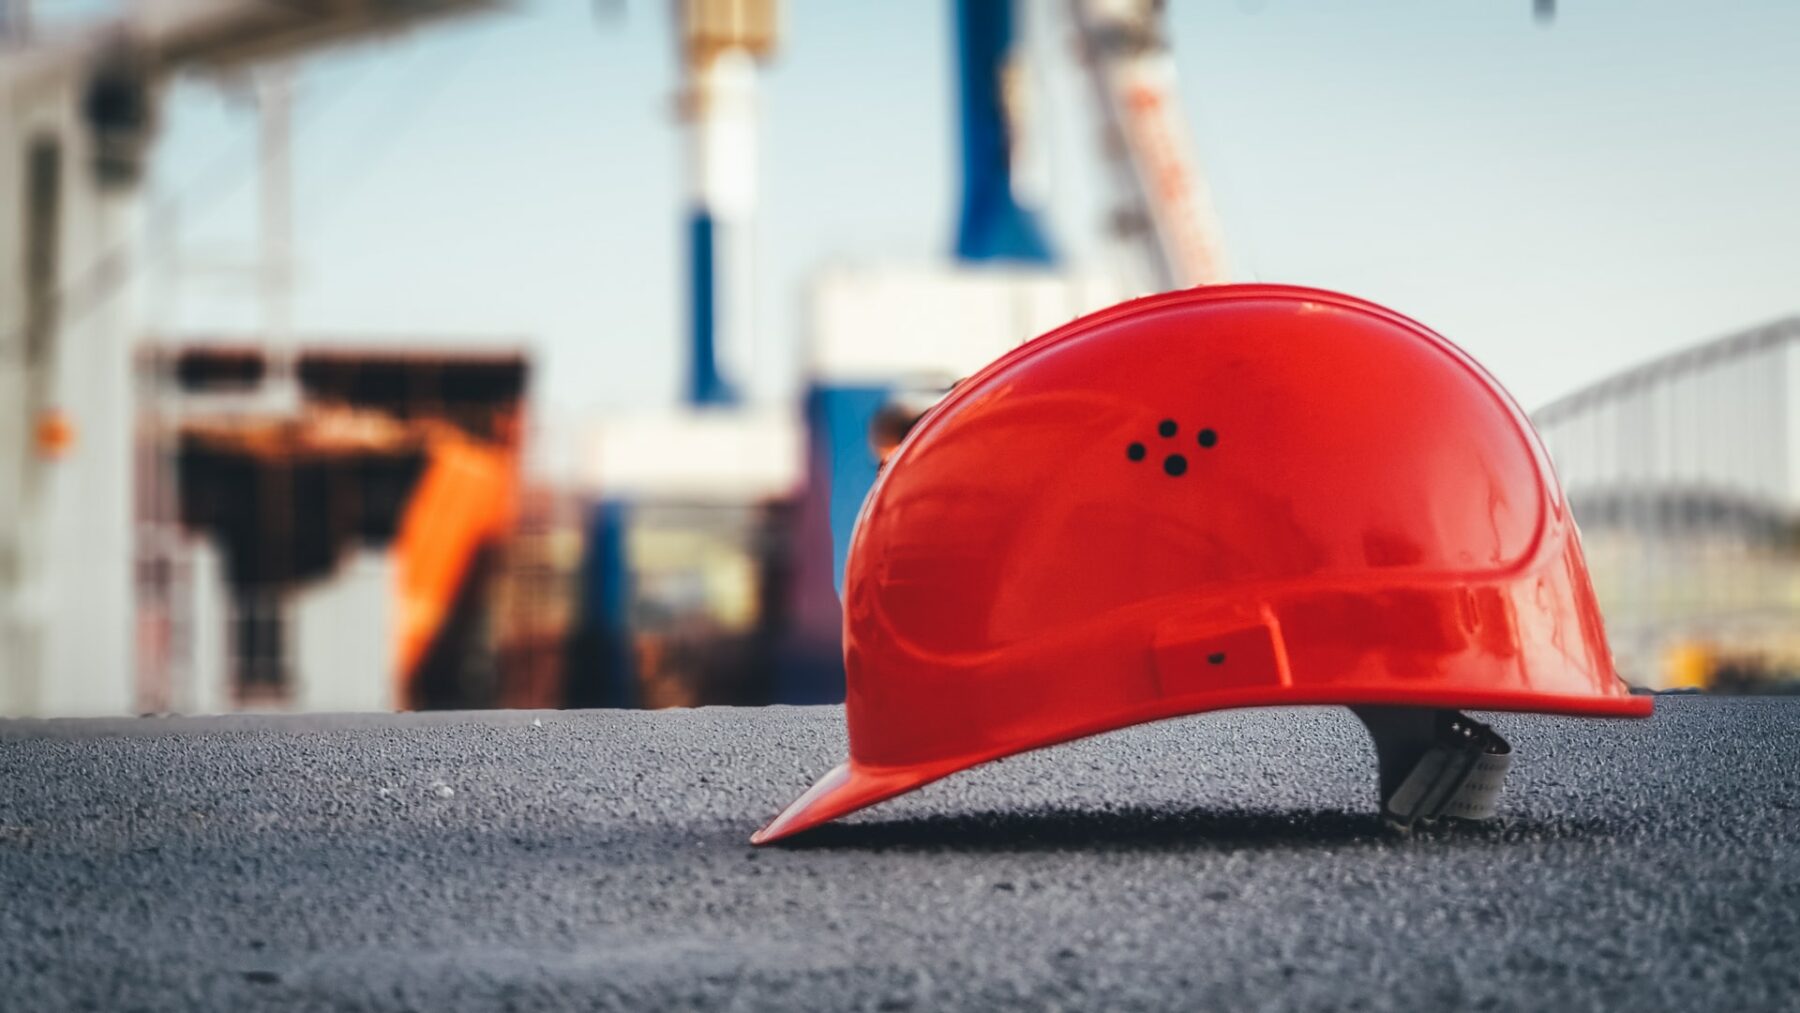 23 Important Statistics About Construction Accidents